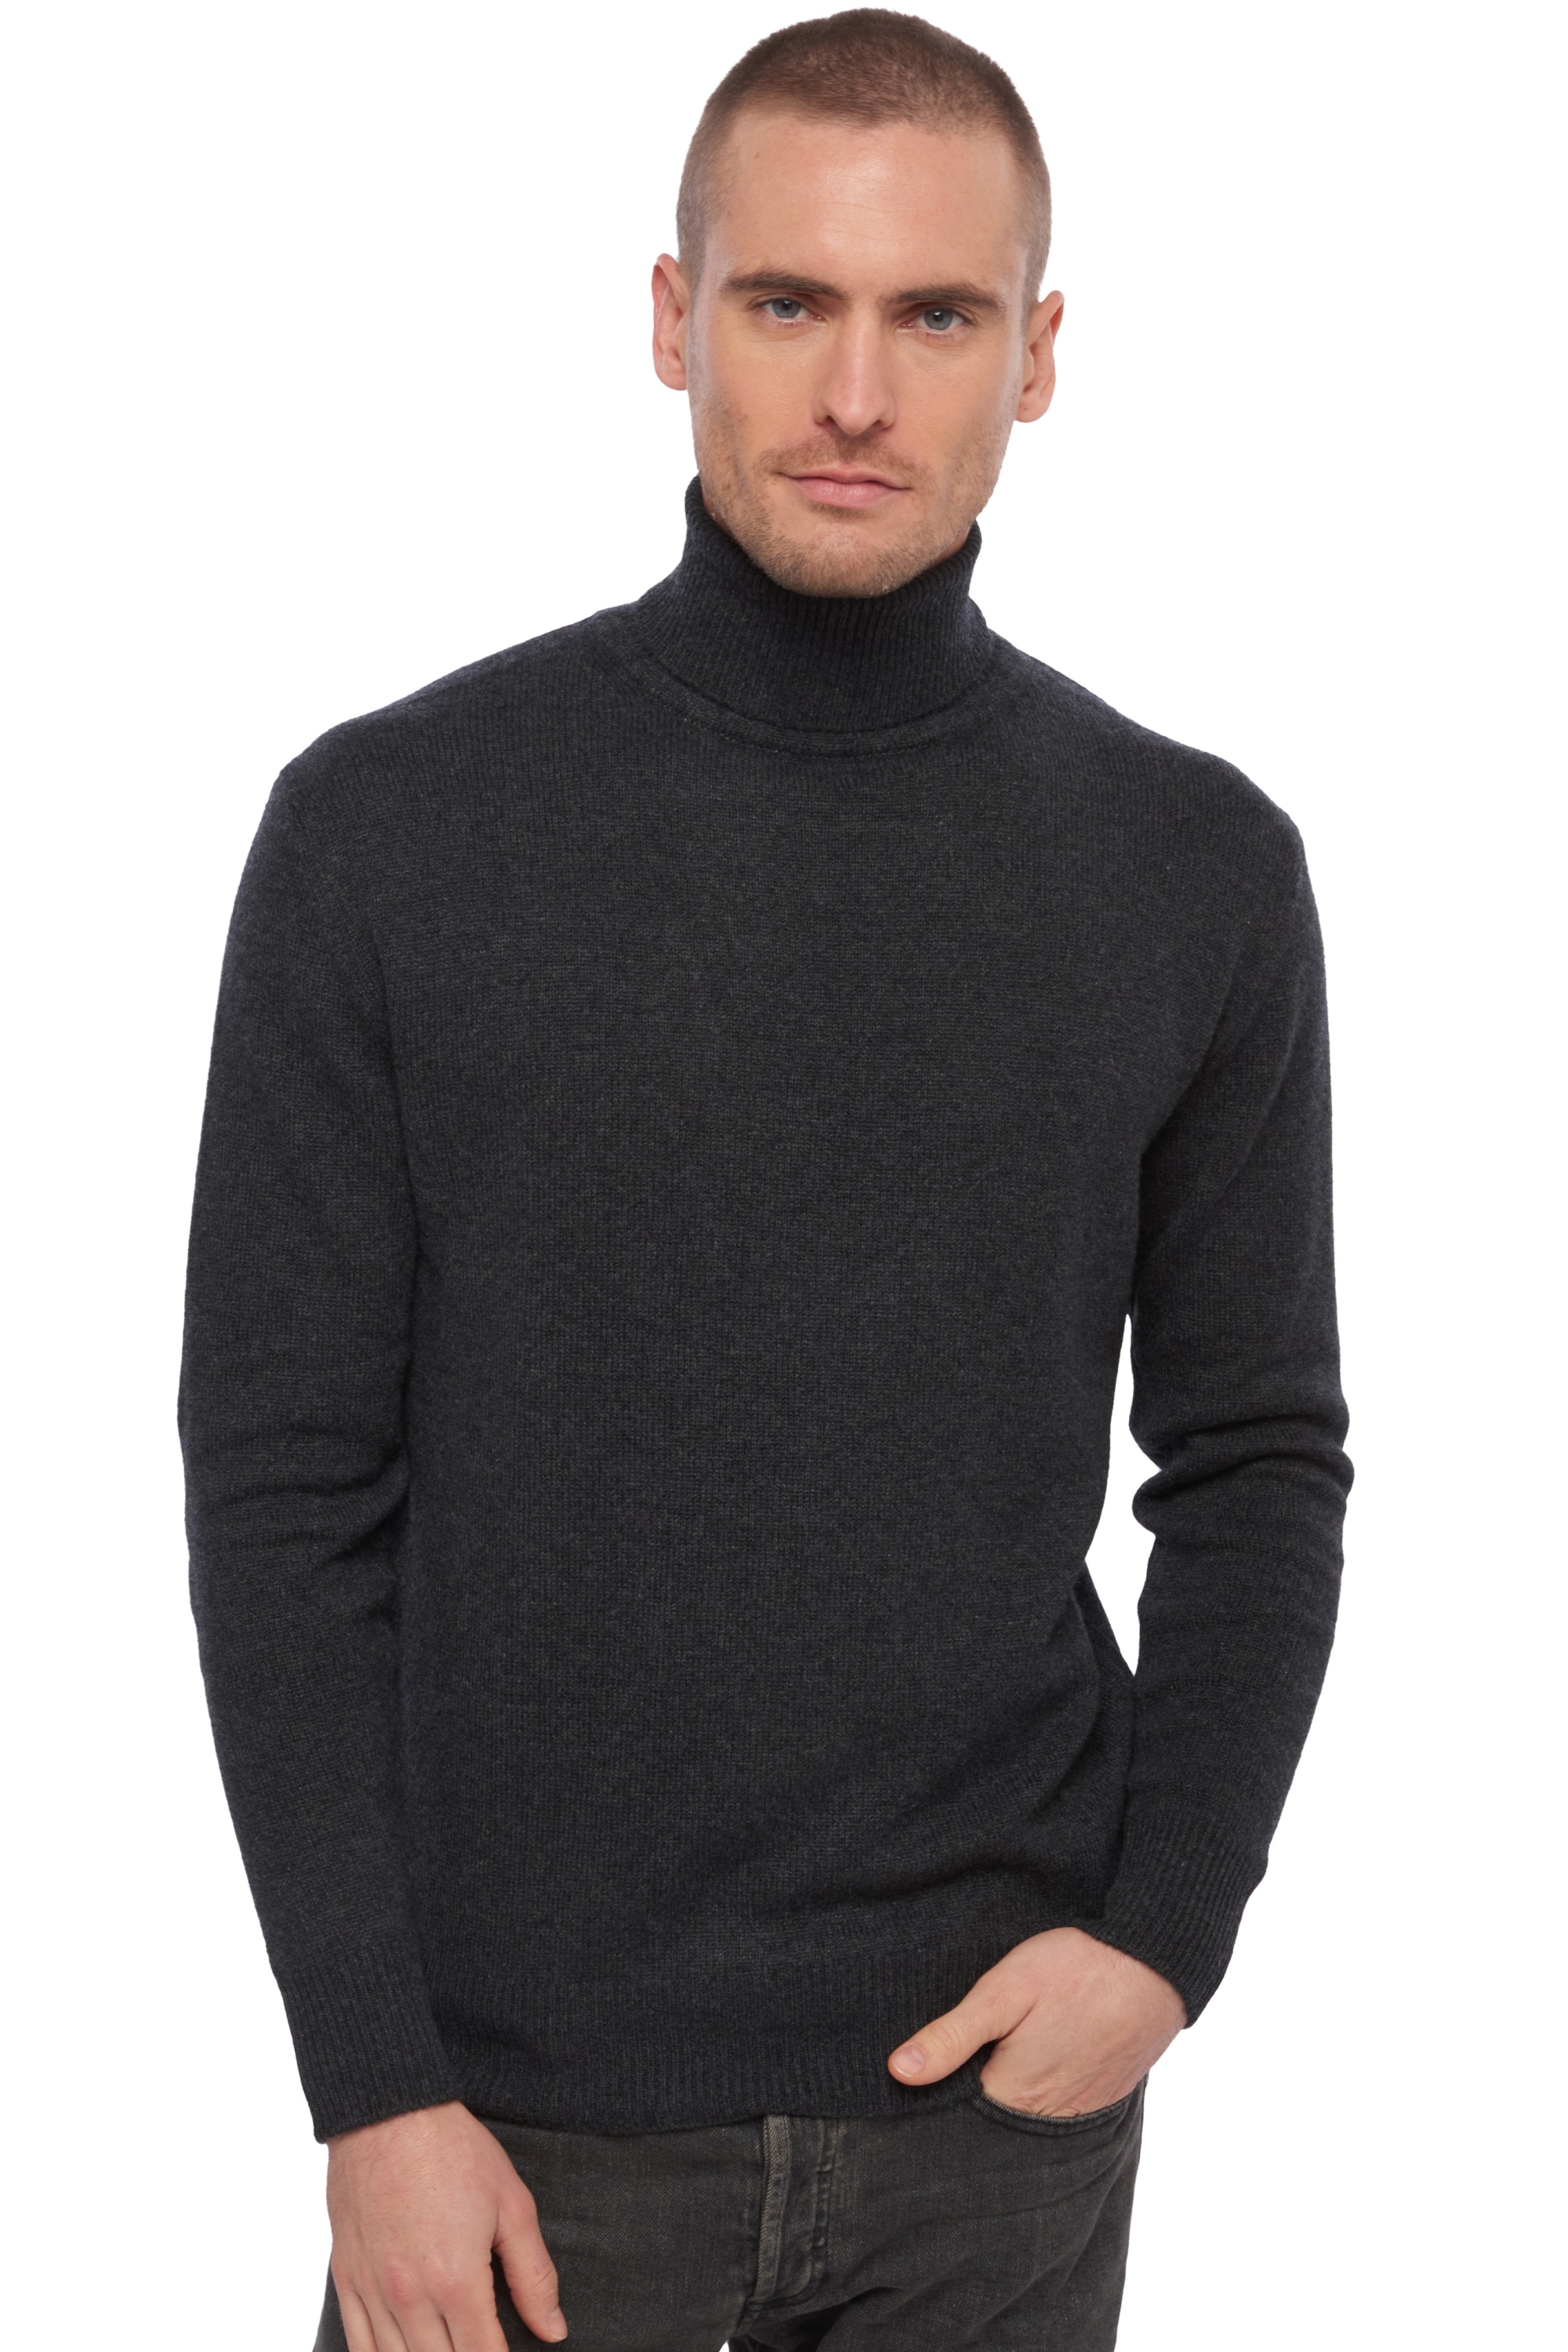 Cachemire pull homme col roule edgar 4f anthracite chine m